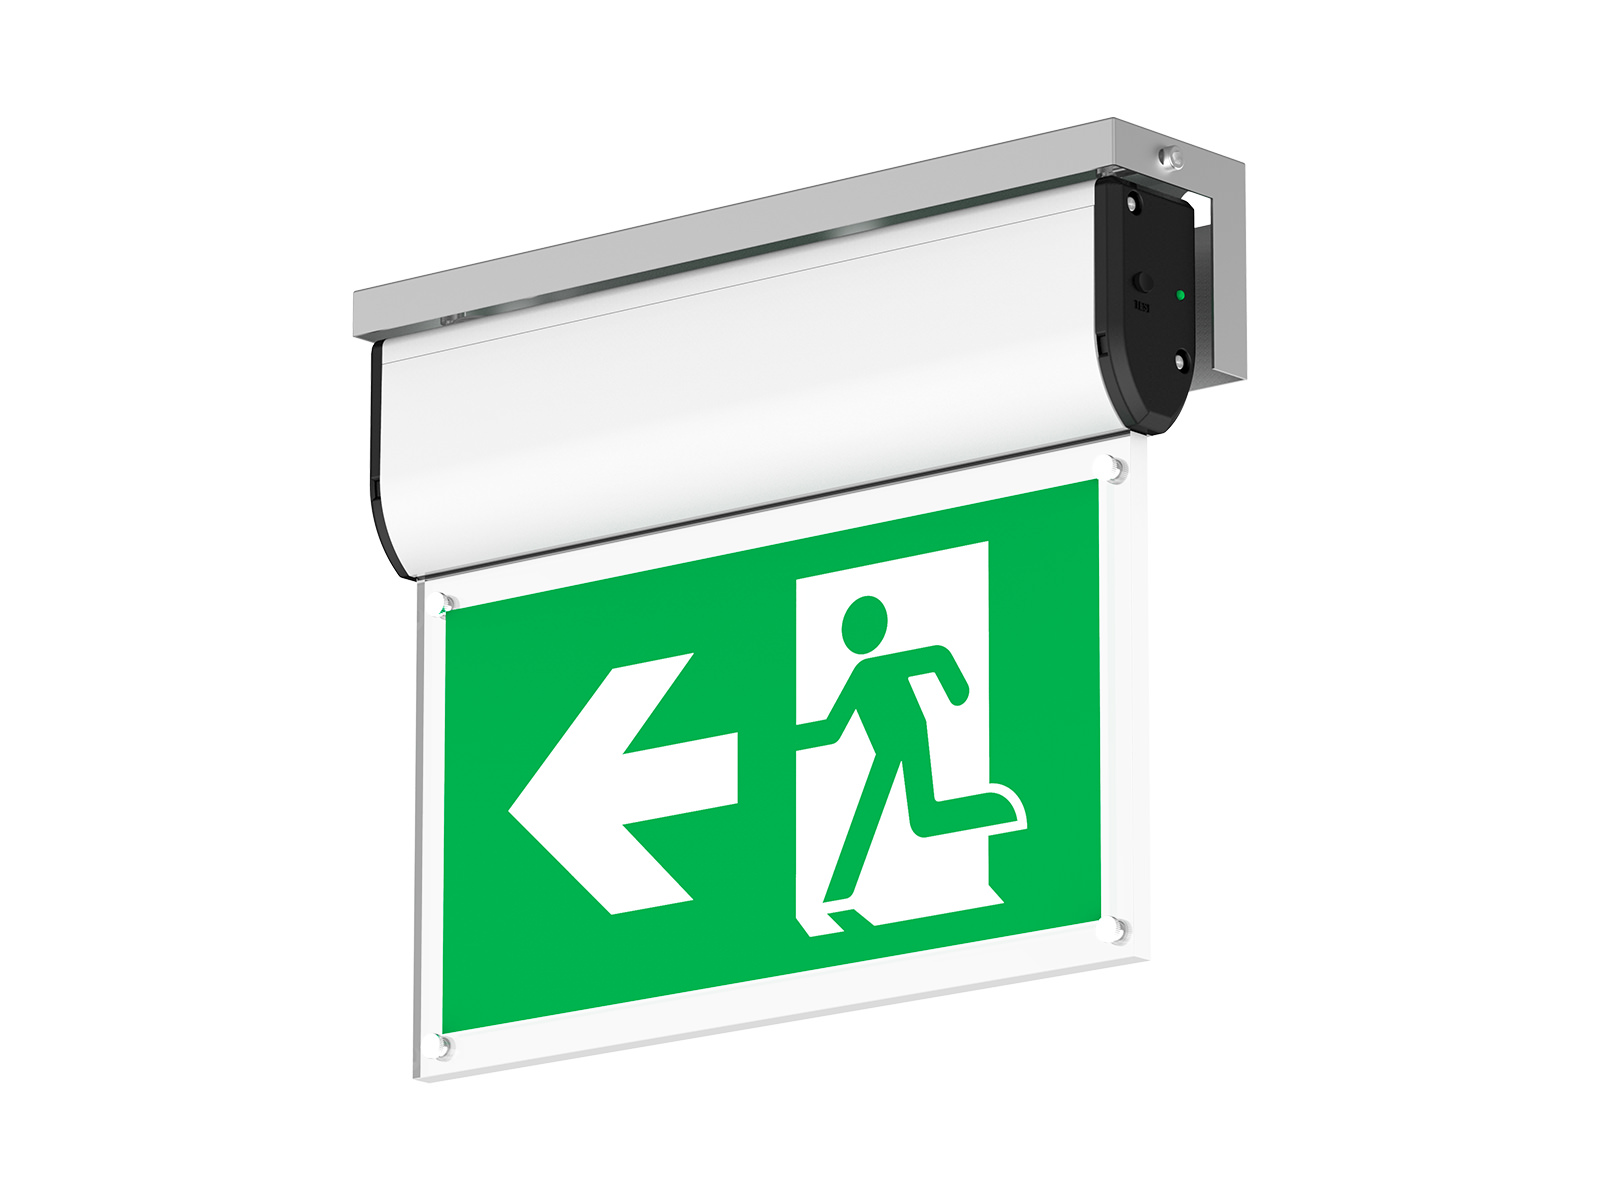 EPE EX2 LED Exit Sign Ceiling Mounting